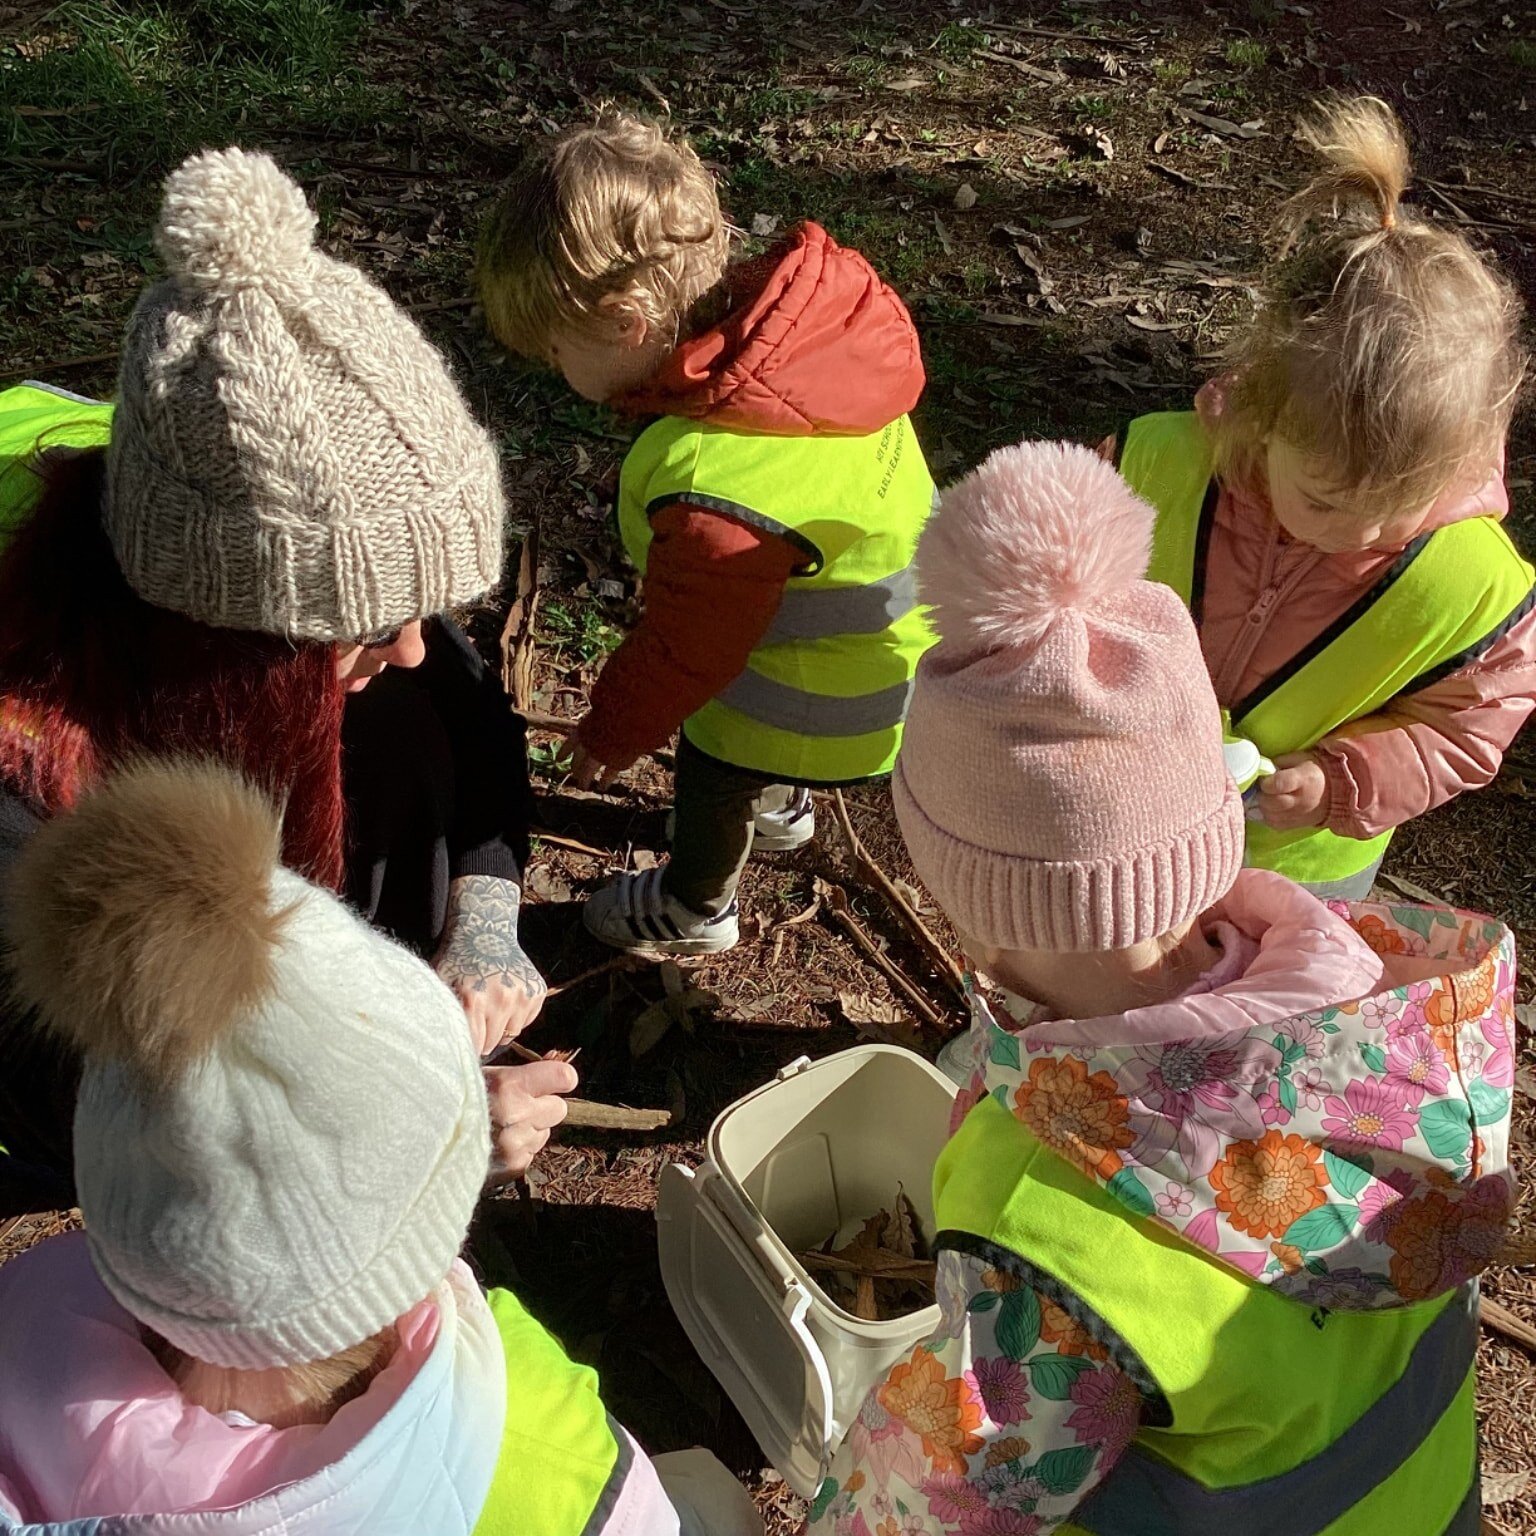 Exploring local environments encourages children to connect with their community and develop their gross-motor skills through the rough terrain.